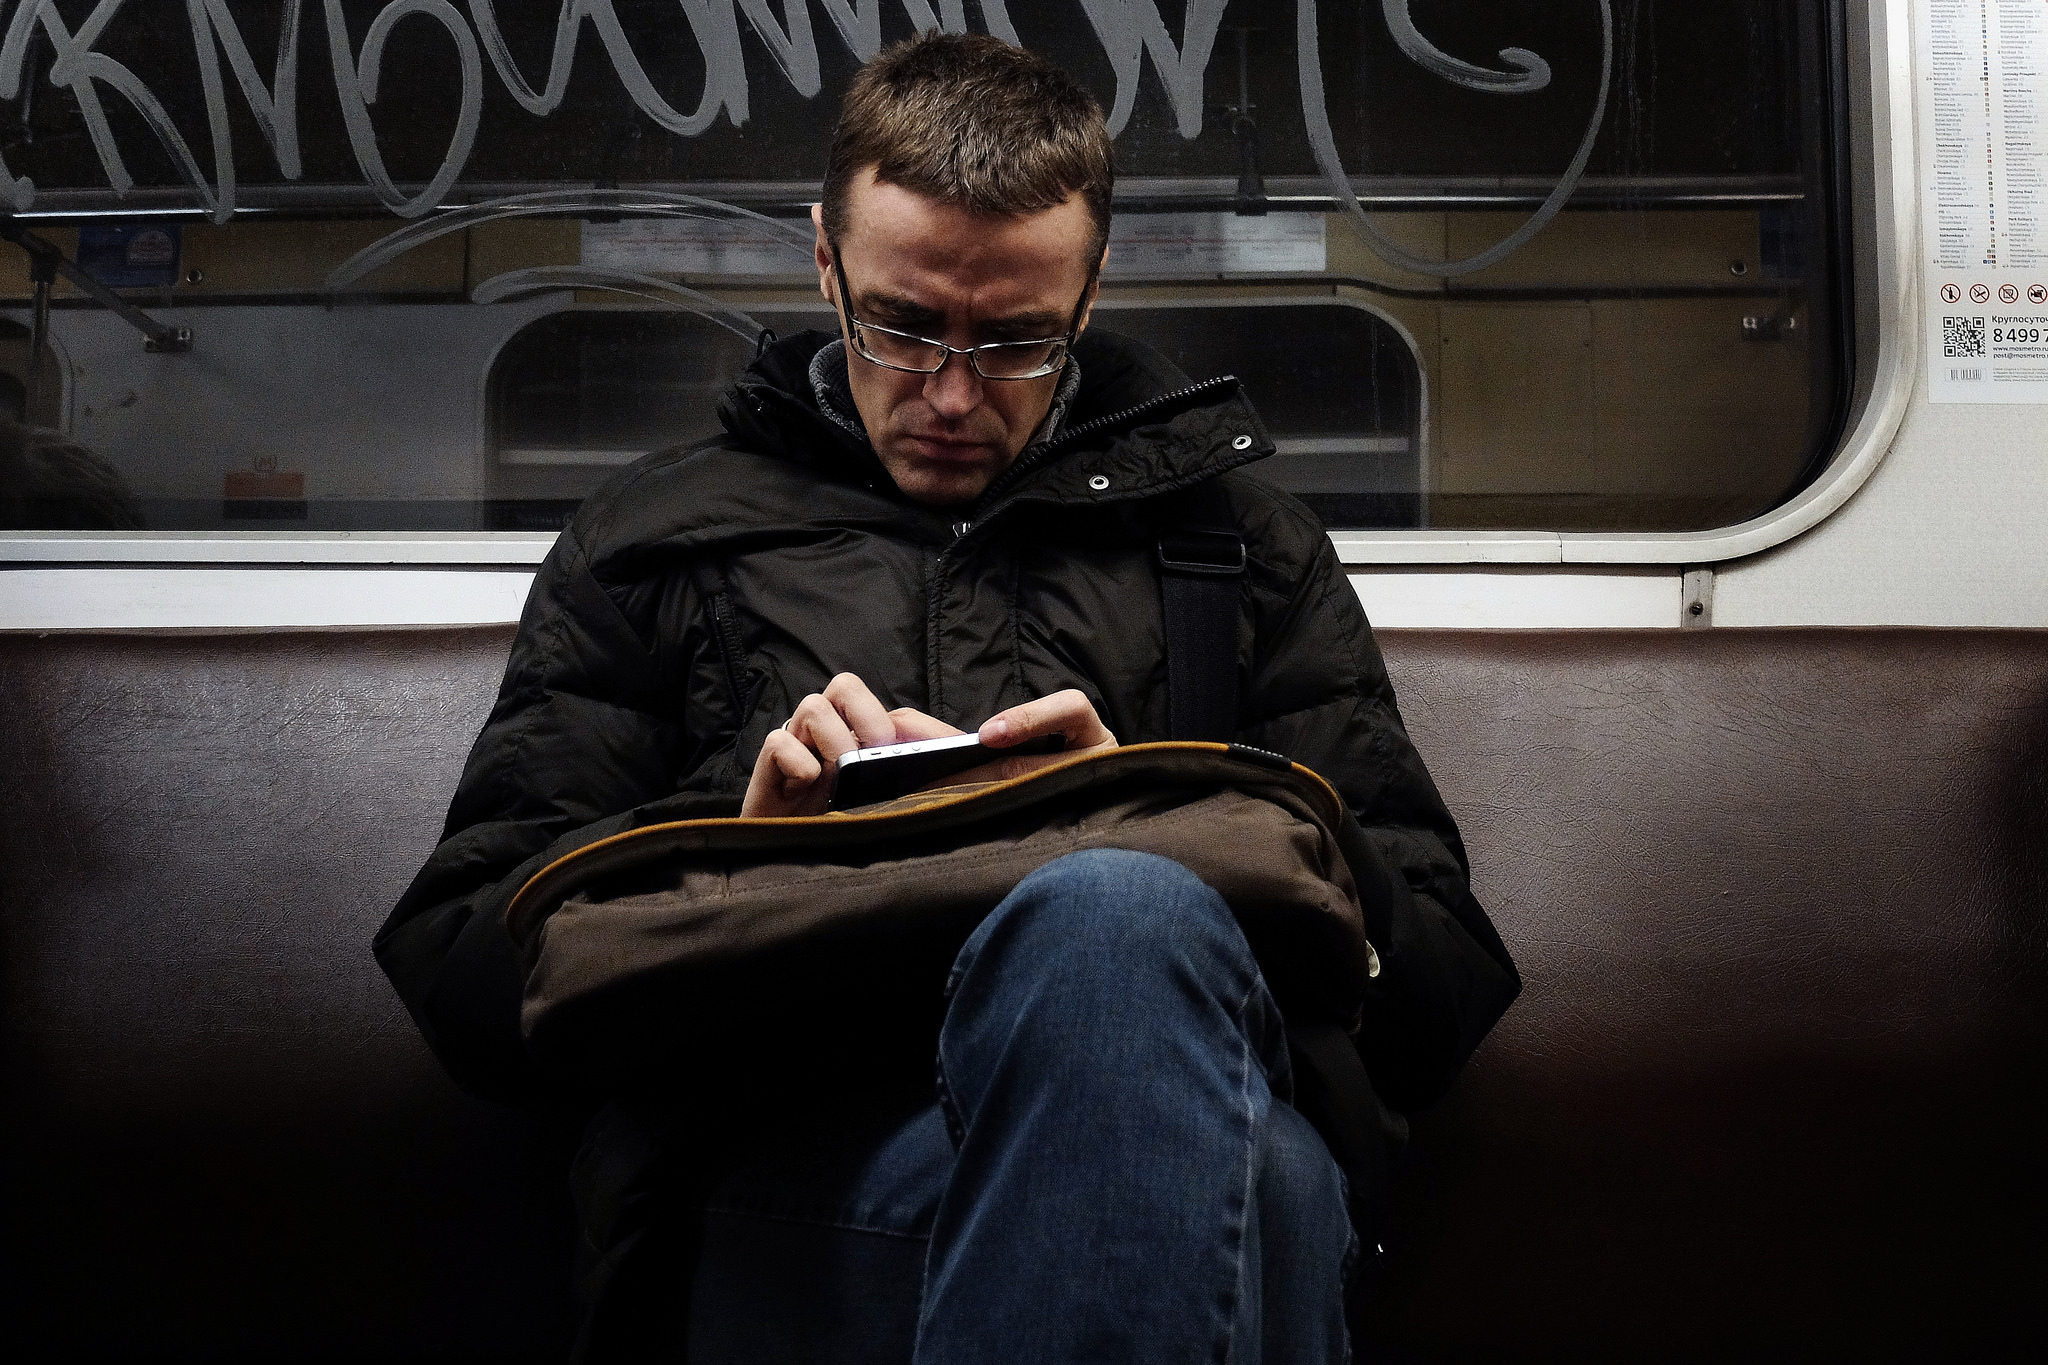 A man reads using his smartphone on the subway